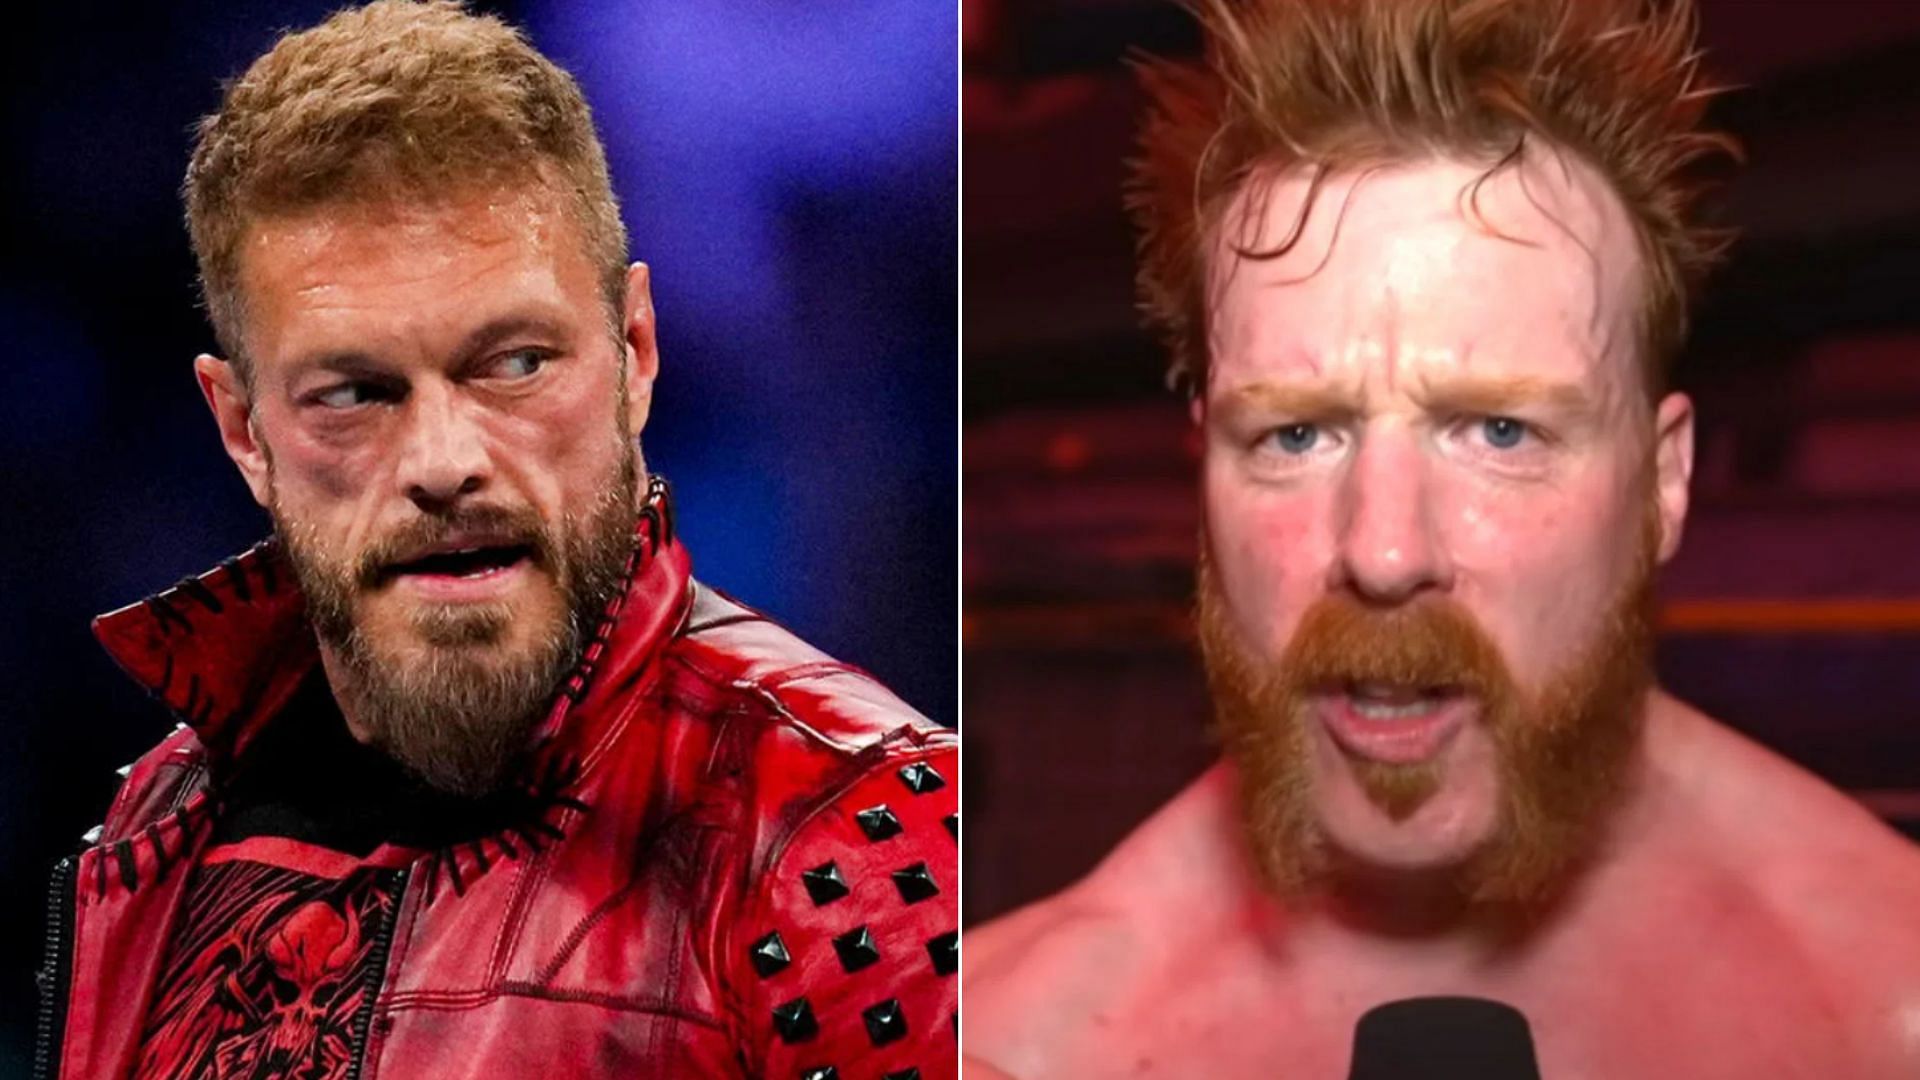 Sheamus has compared a current star to Edge